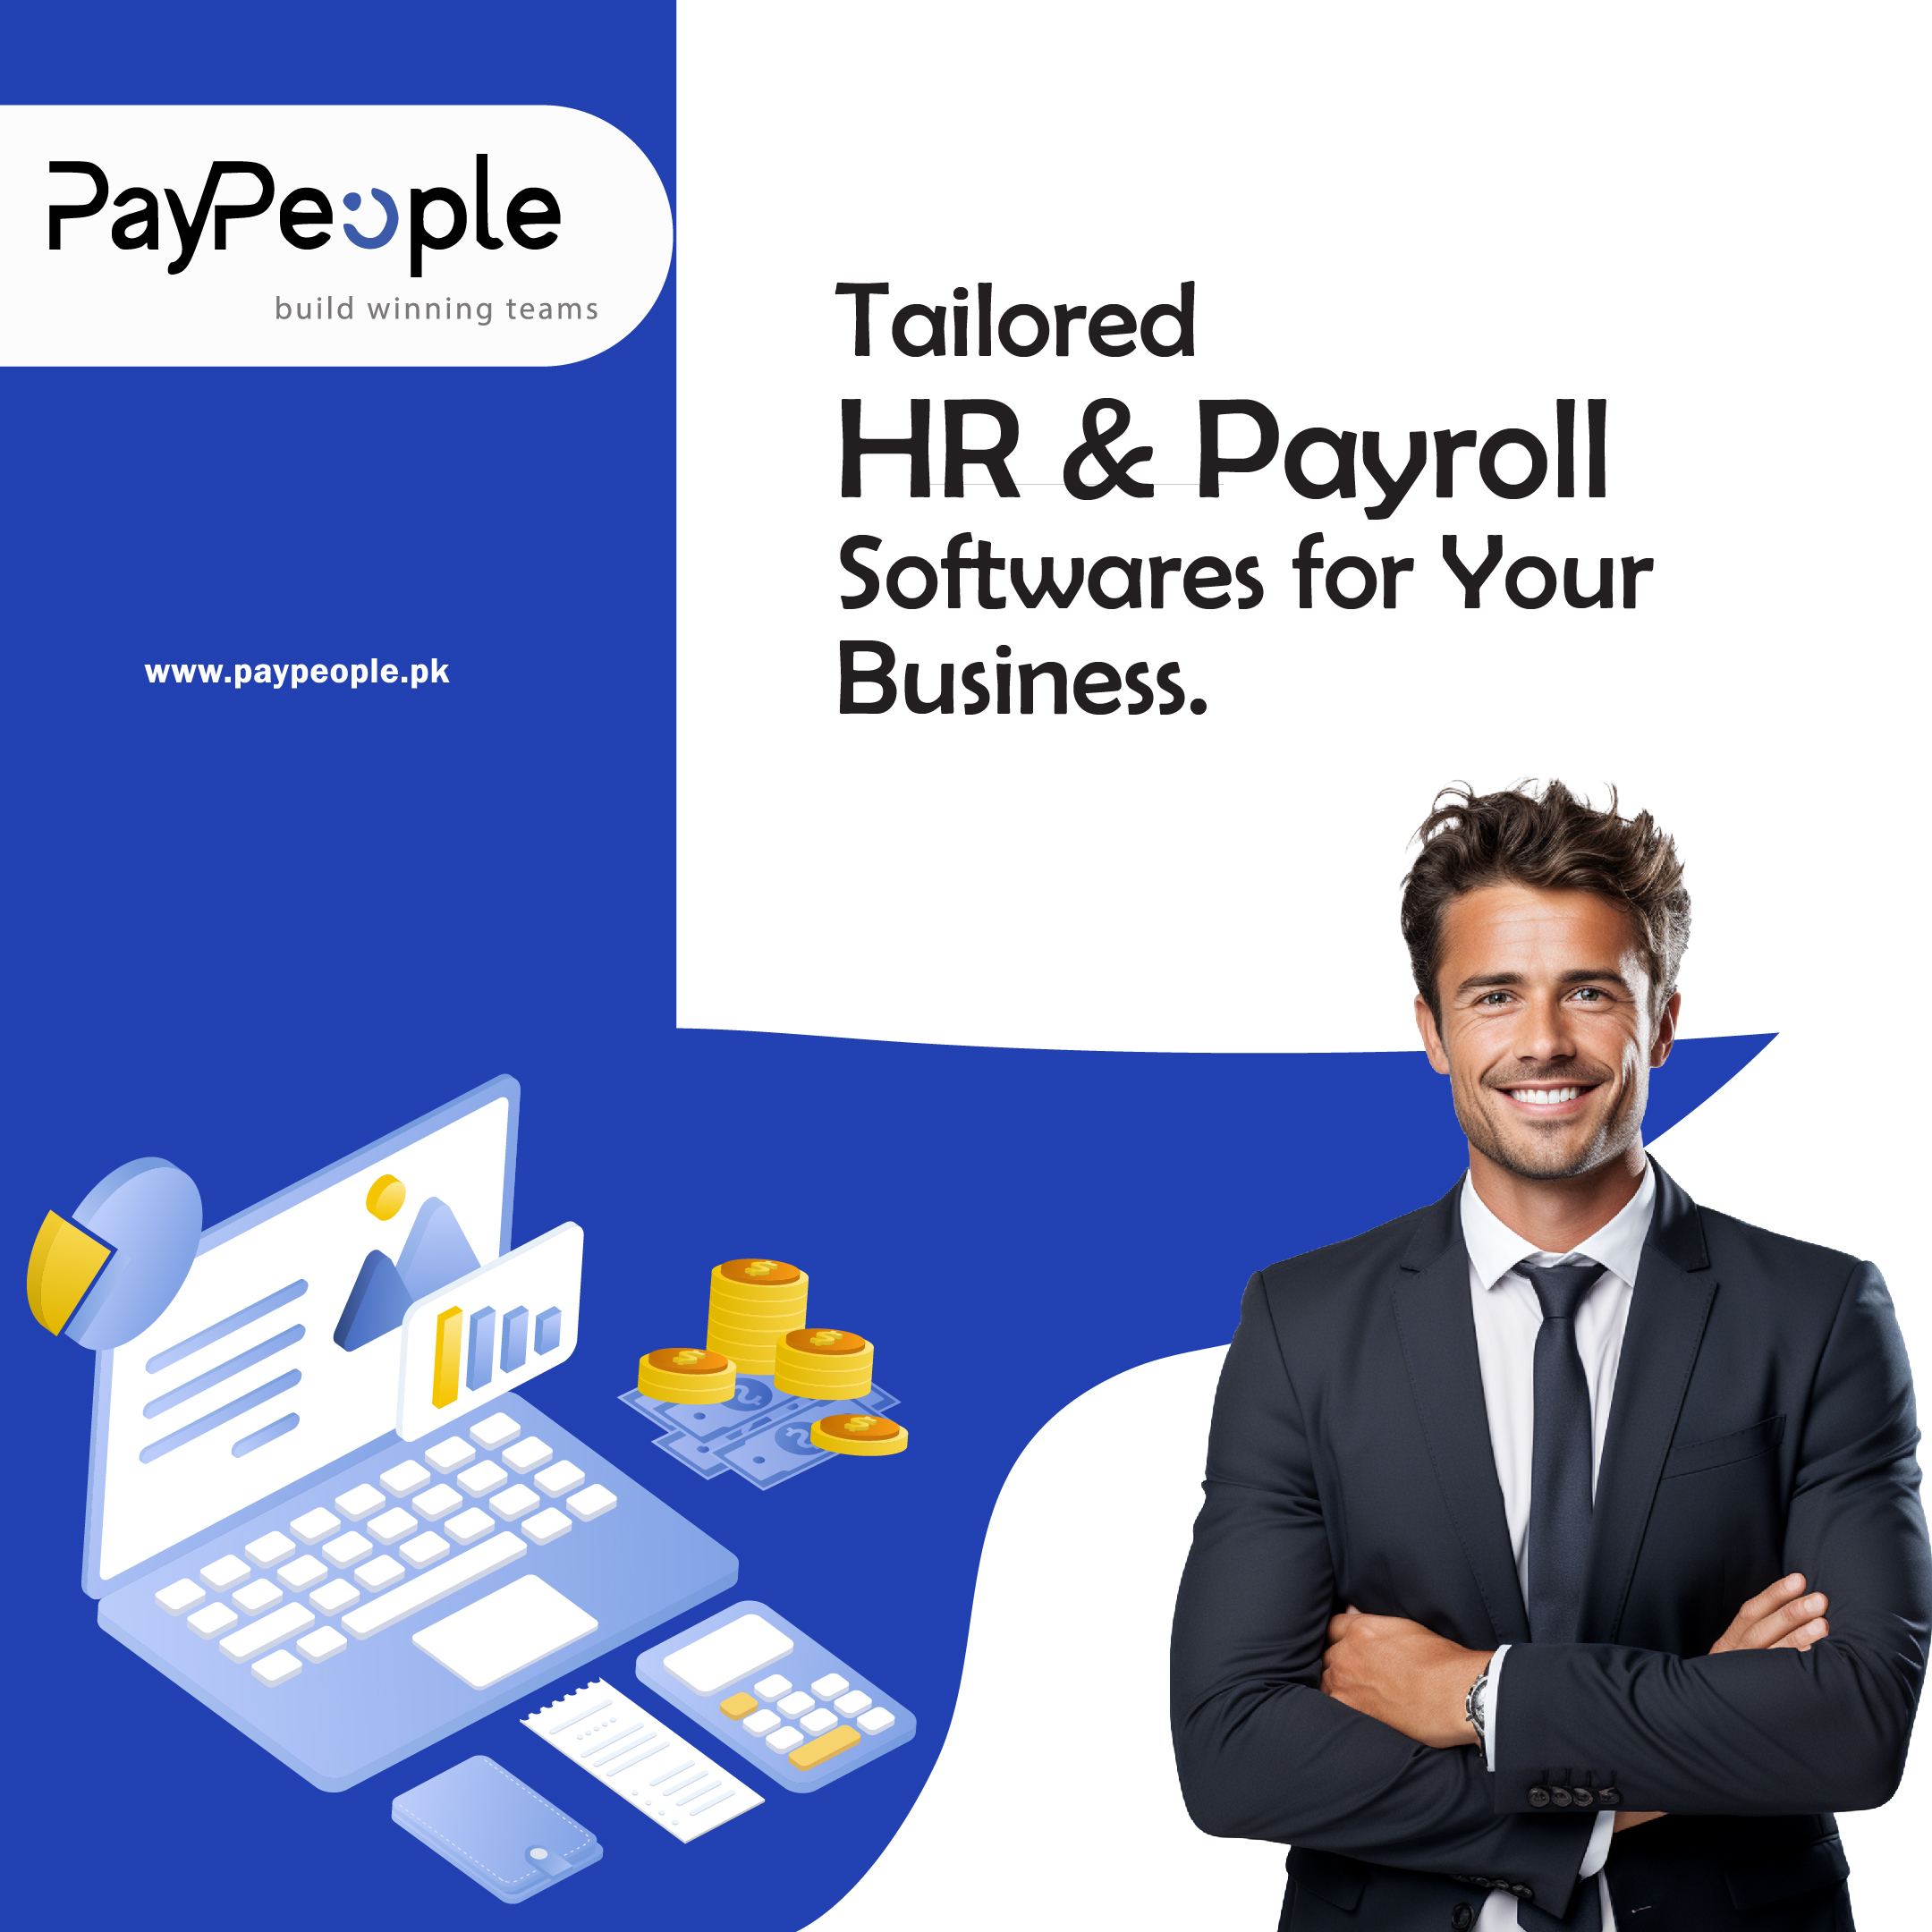 Can HRIS in Pakistan handle payroll processing efficiently?